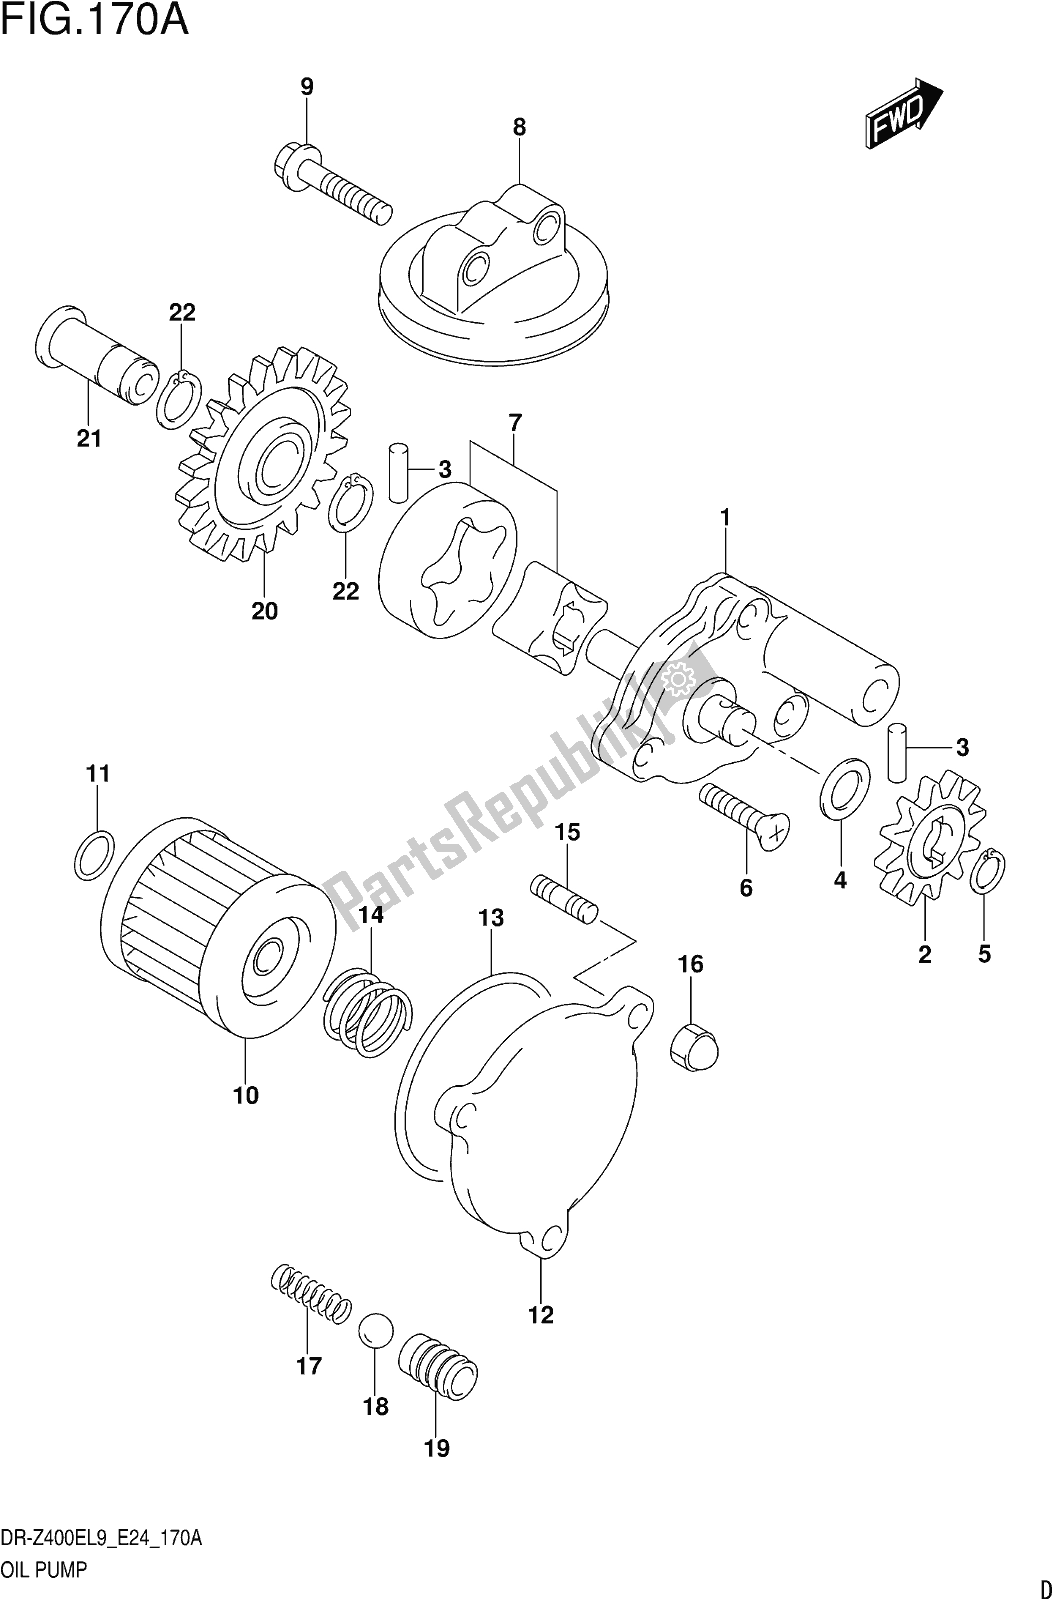 All parts for the Fig. 170a Oil Pump of the Suzuki DR-Z 400E 2019